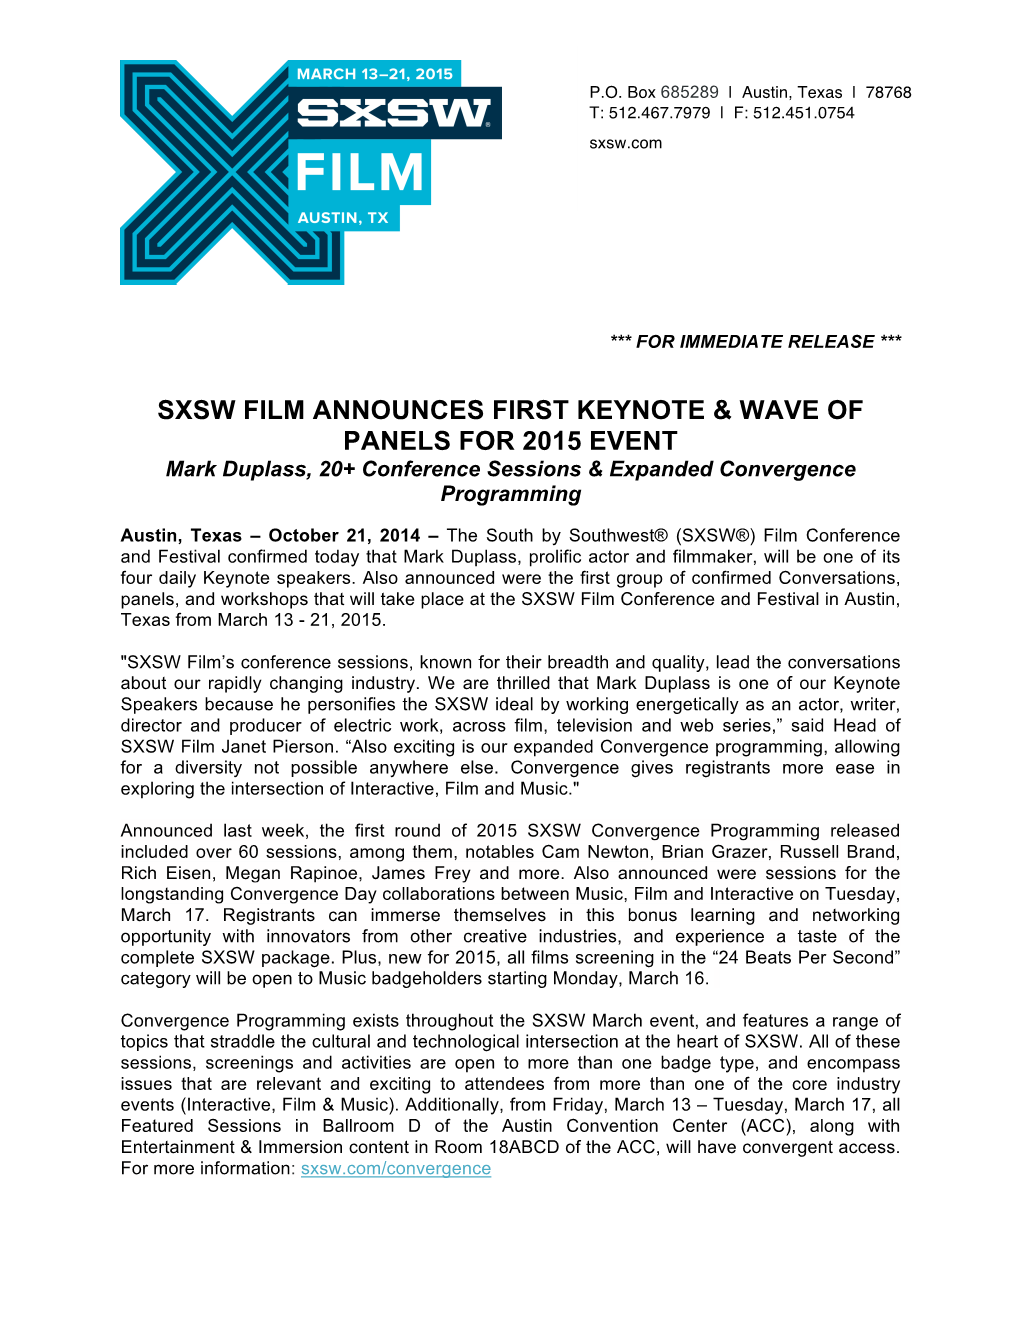 Sxsw Film Announces First Keynote & Wave of Panels